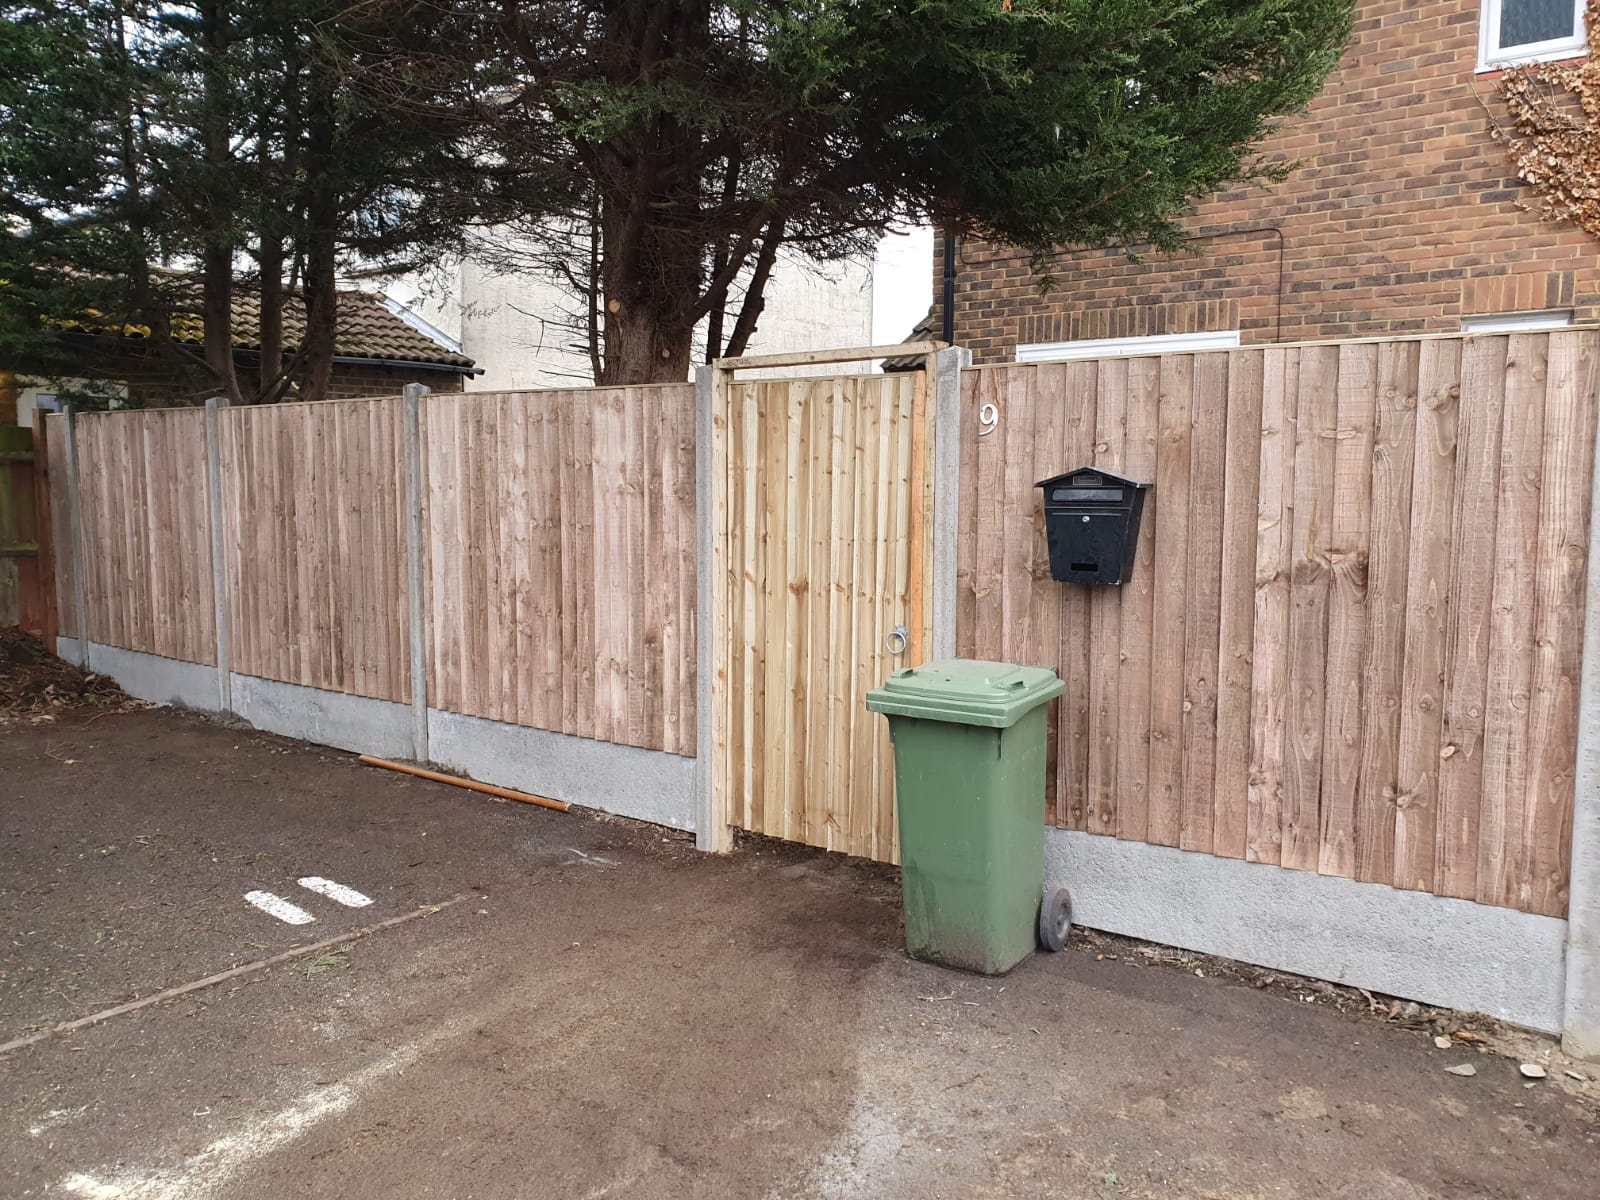 New fencing and gate